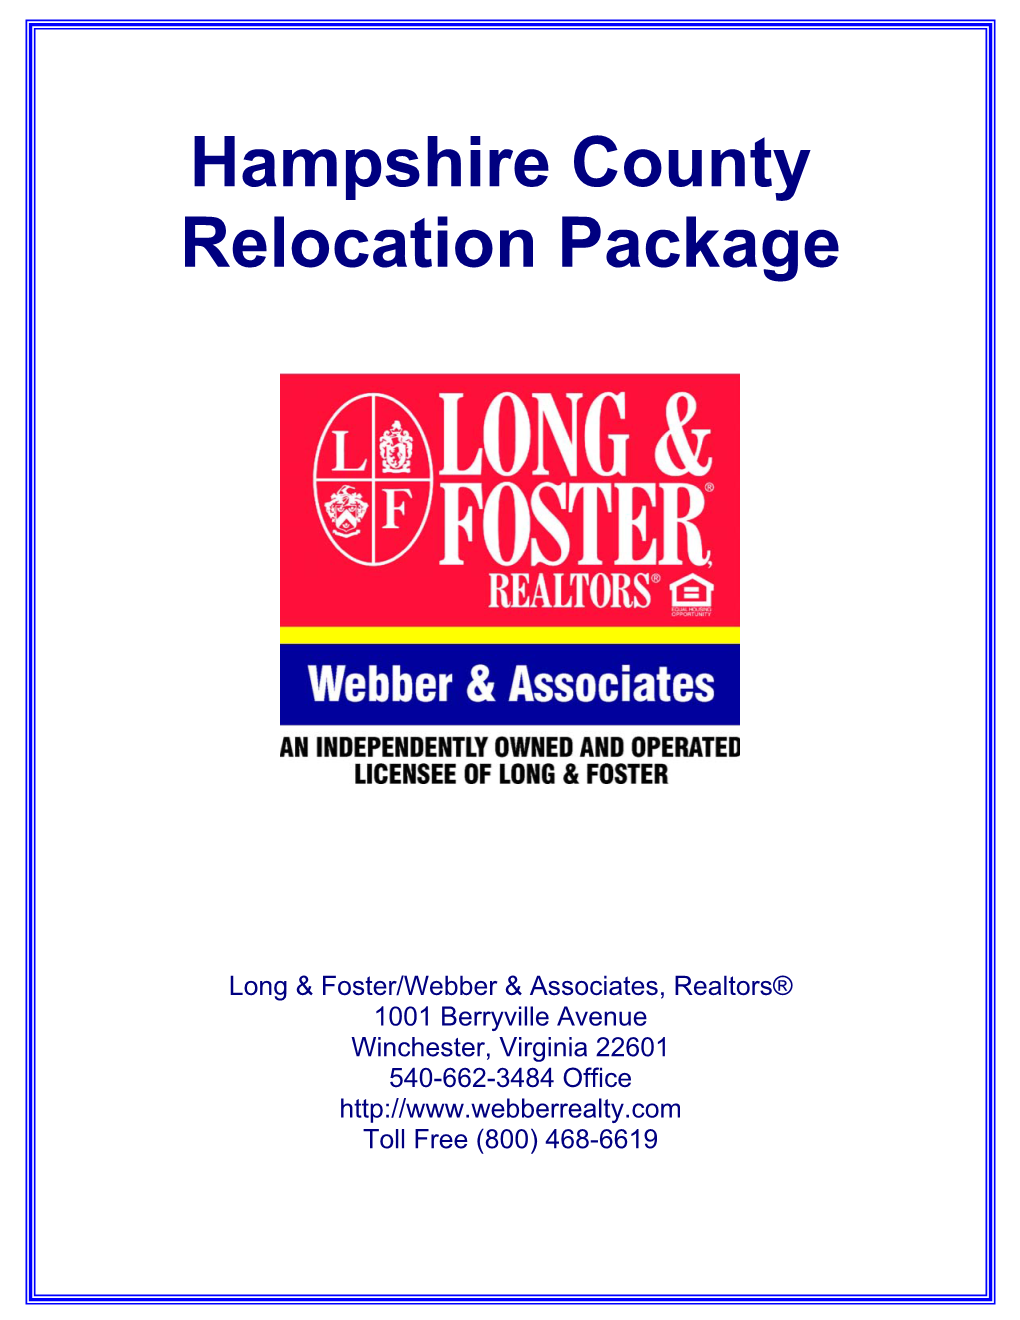 Hampshire County Relocation Package